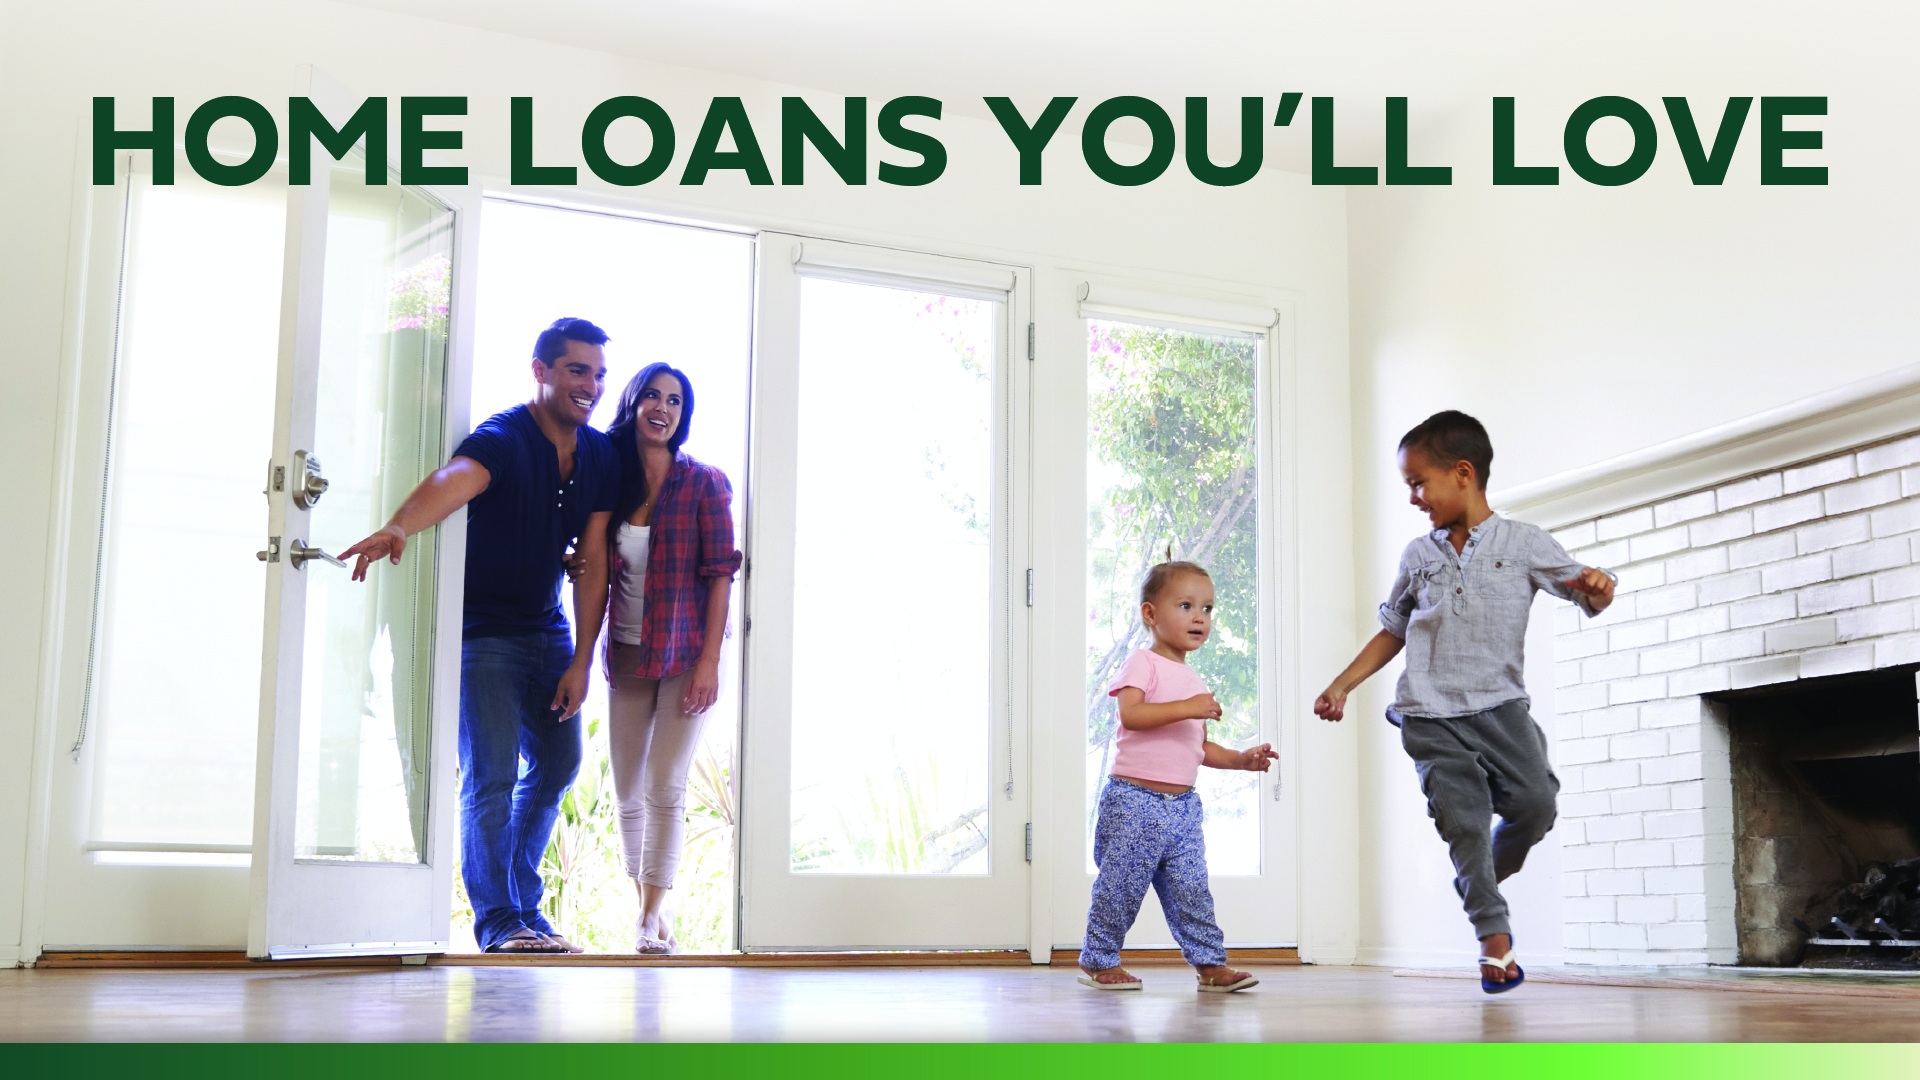 Home Loans You'll Love from GMFCU